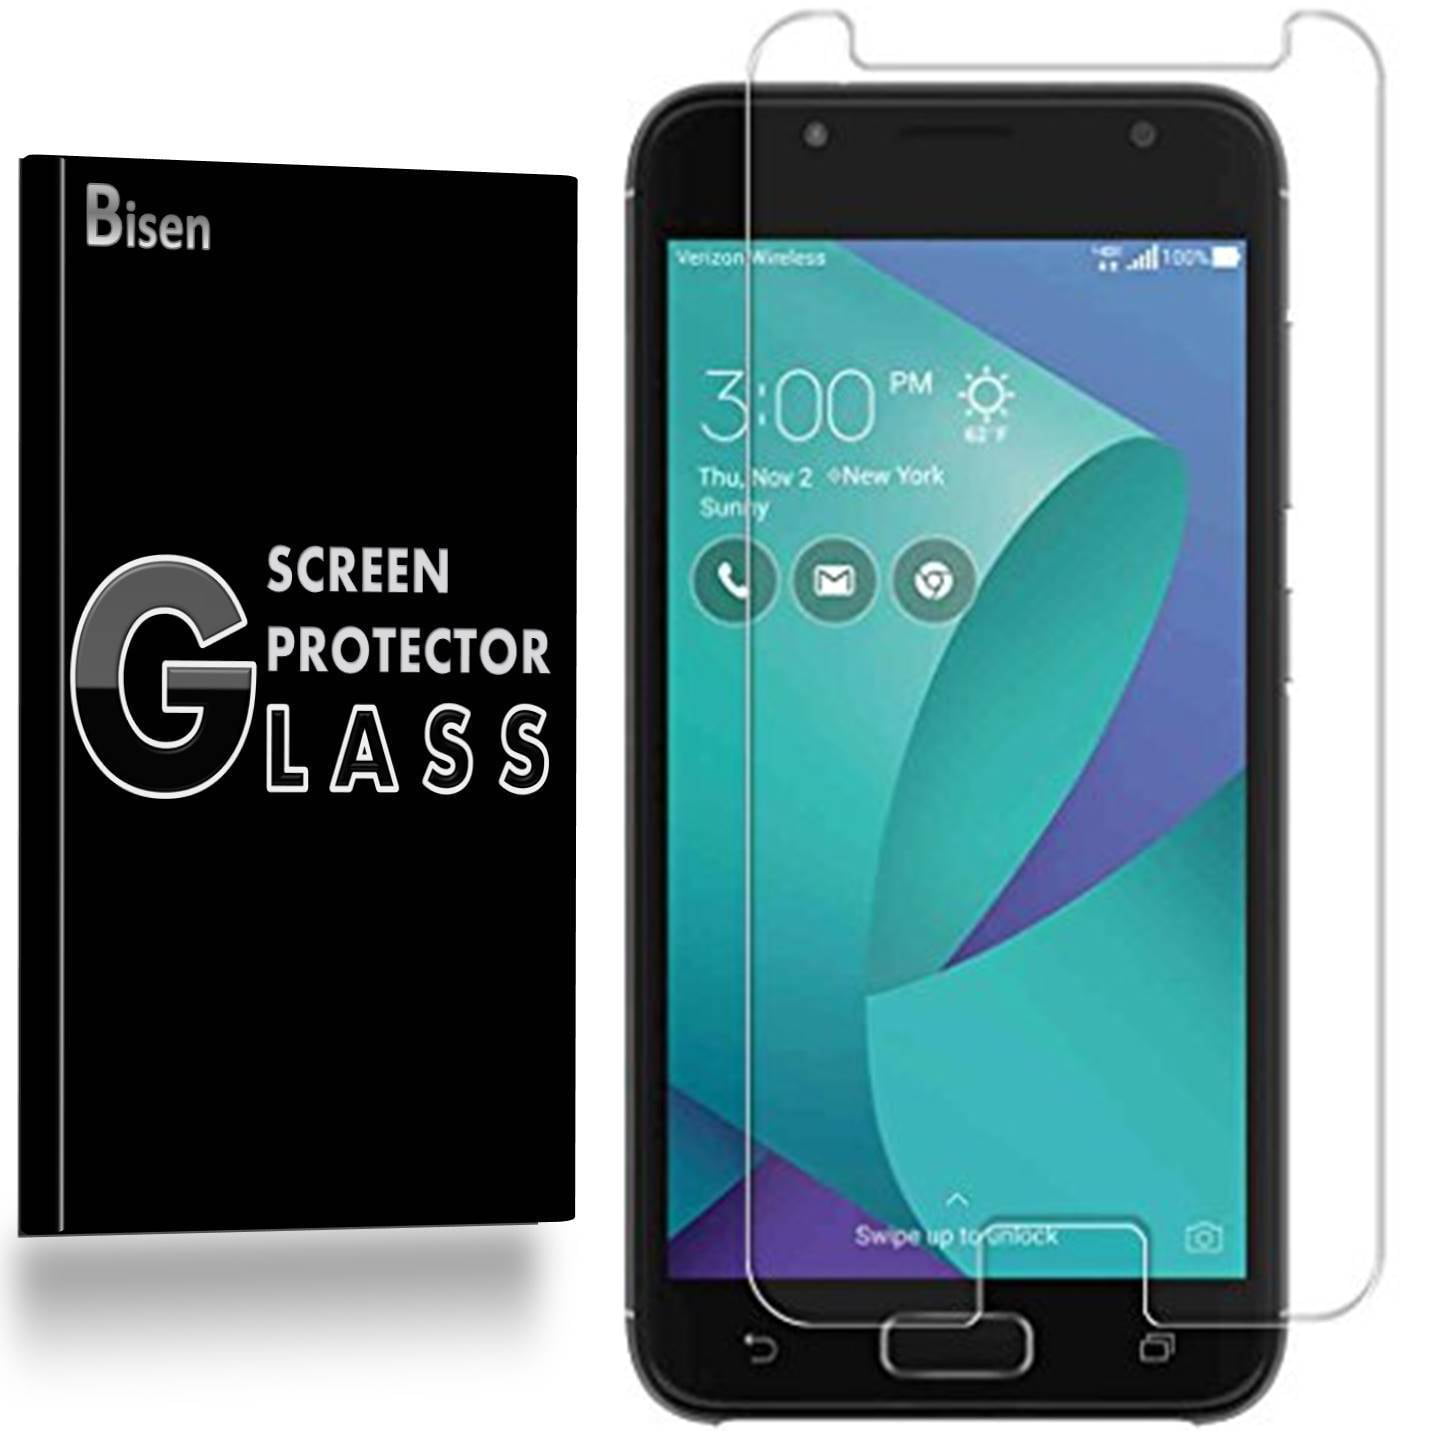 ASUS Zenfone V [BISEN] 9H Tempered Glass Screen Protector, Anti-Scratch, Anti-Shock, Shatterproof, Bubble Free